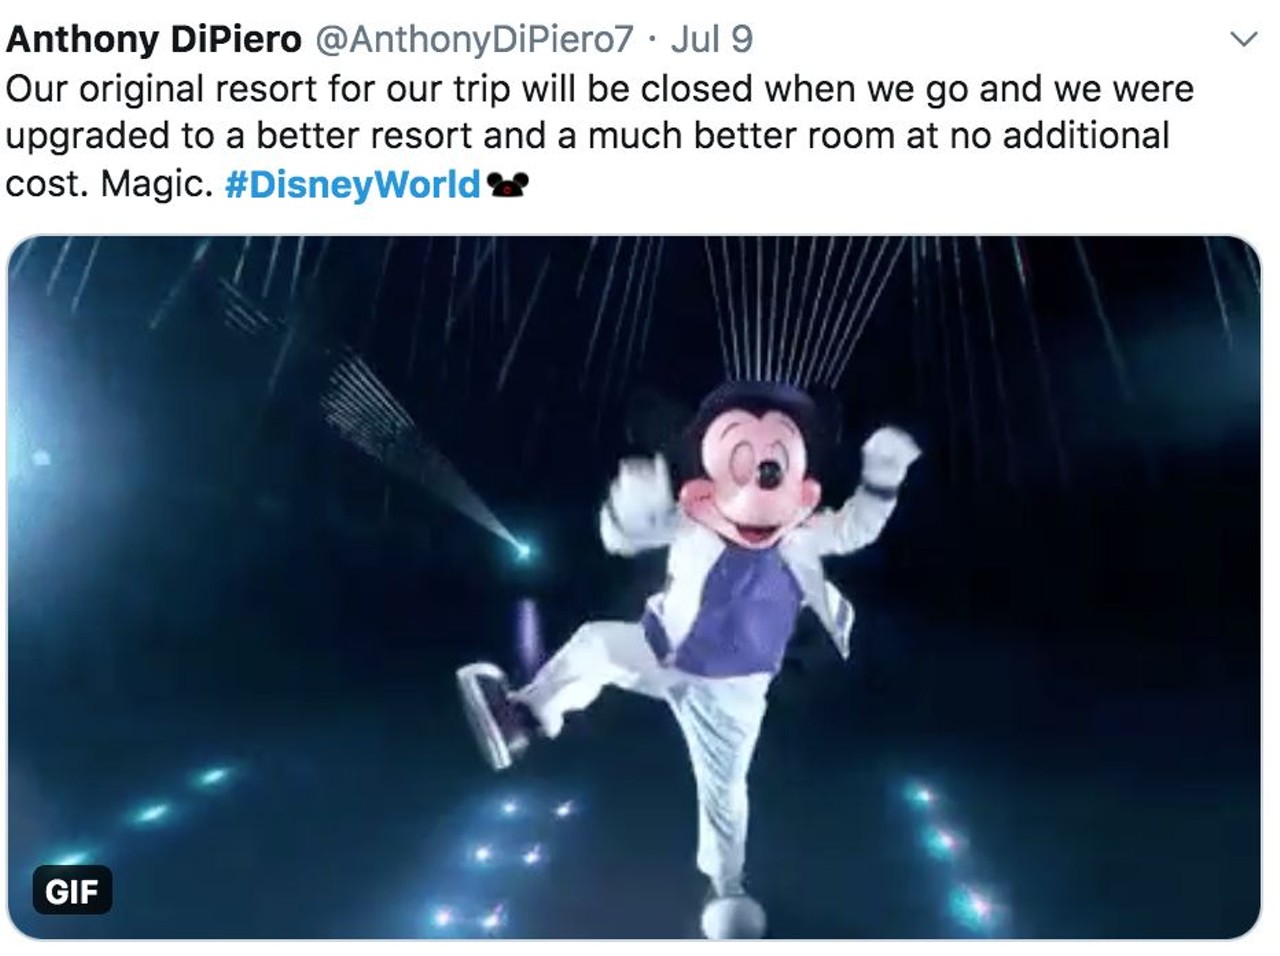 With tourists flocking to Walt Disney World during a pandemic, Twitter lets loose